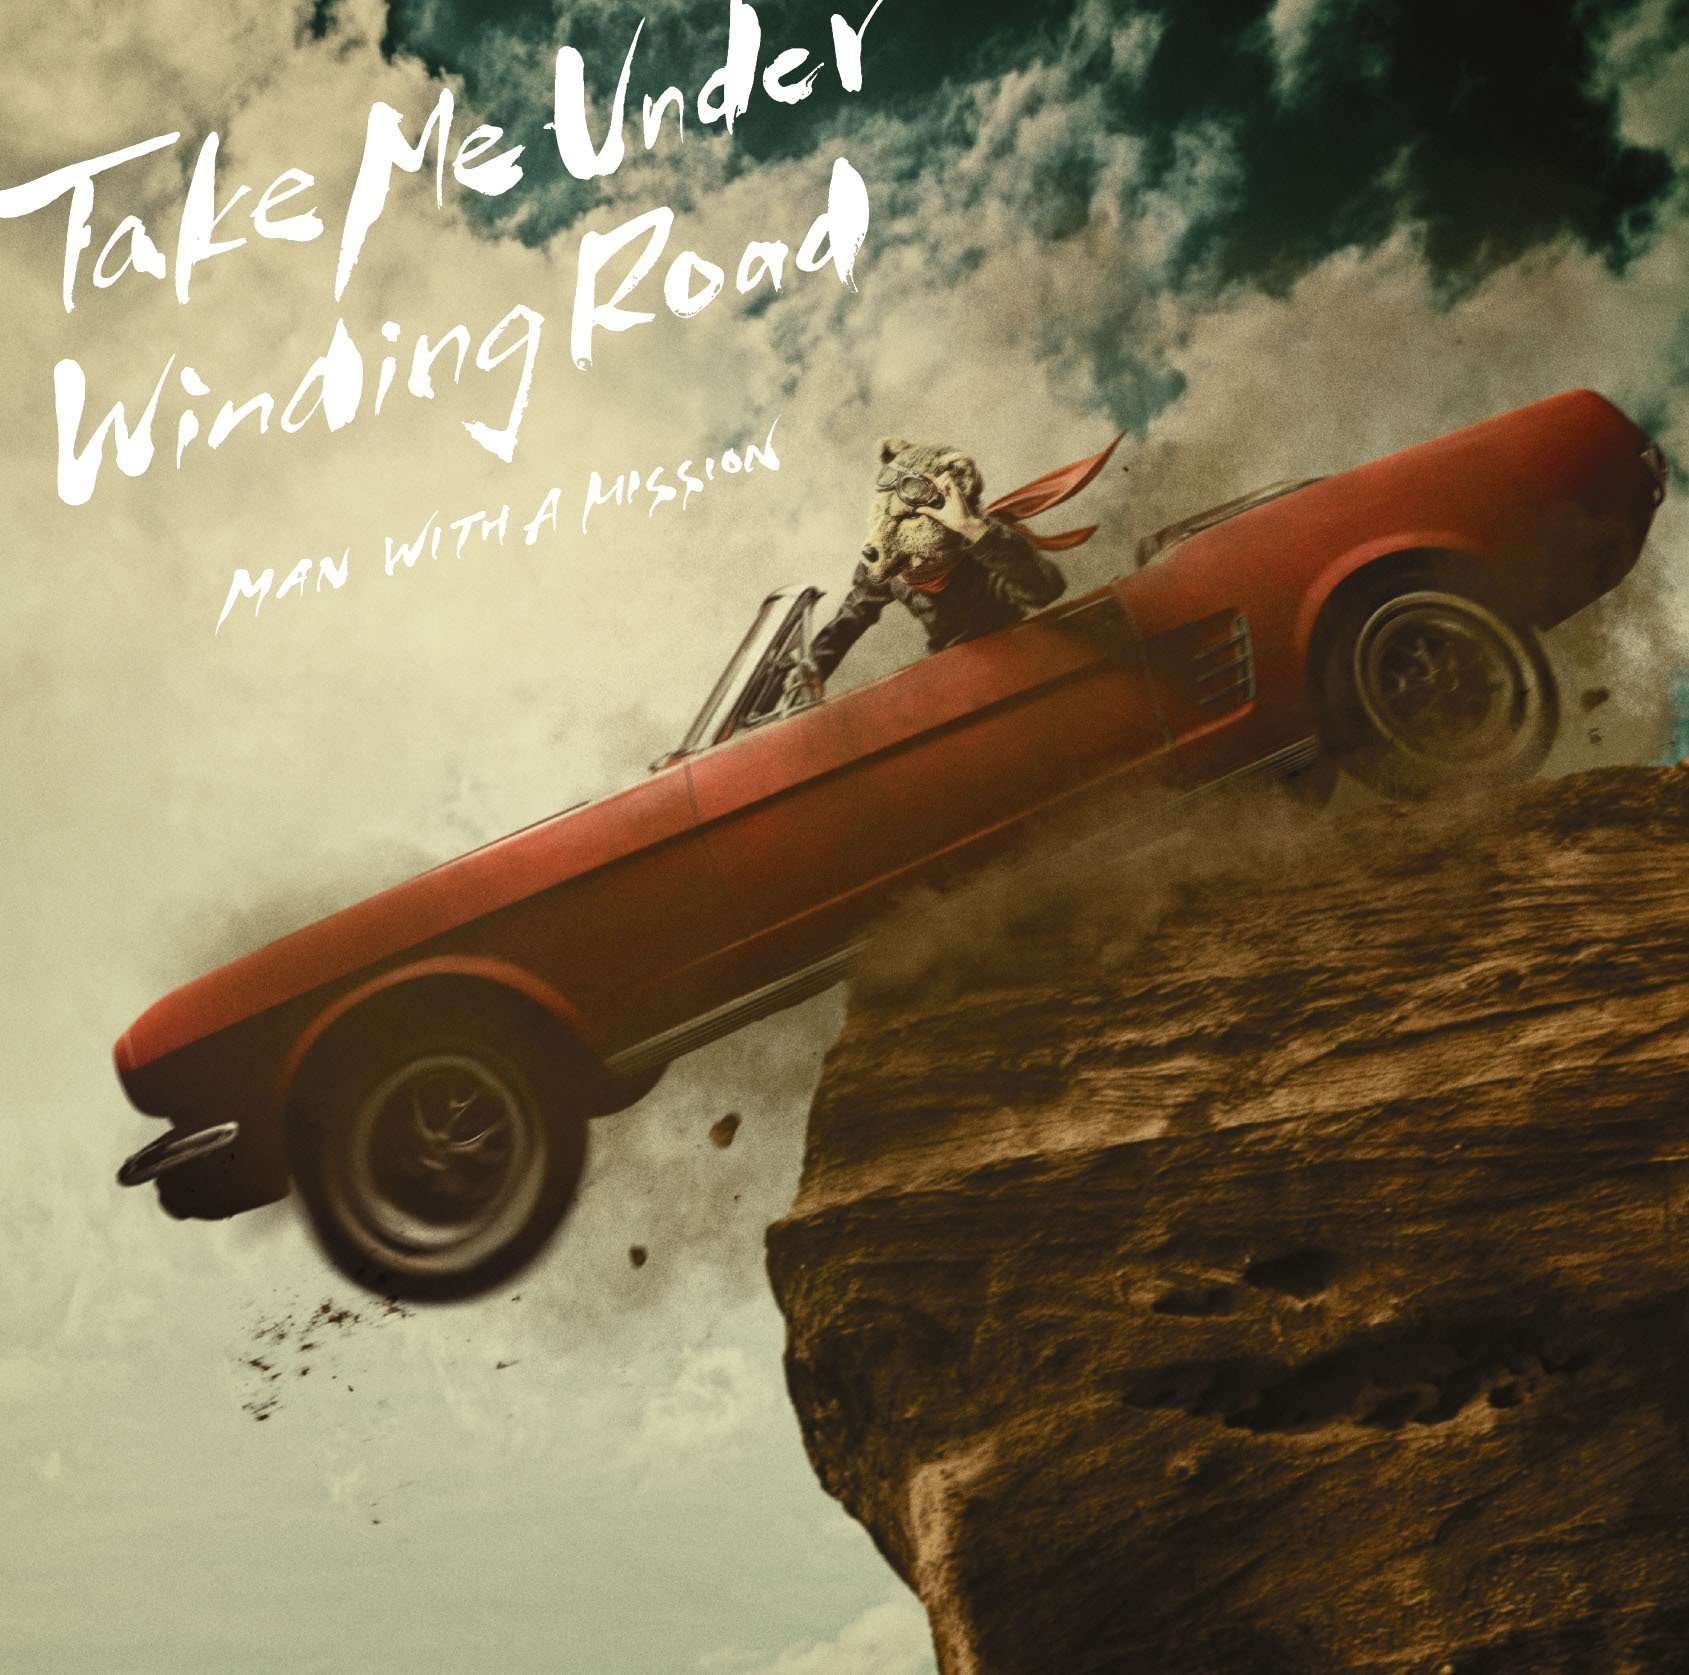 MAN WITH A MISSION – Take Me Under / Winding Road [FLAC / 24bit Lossless / WEB] [2018.04.18]